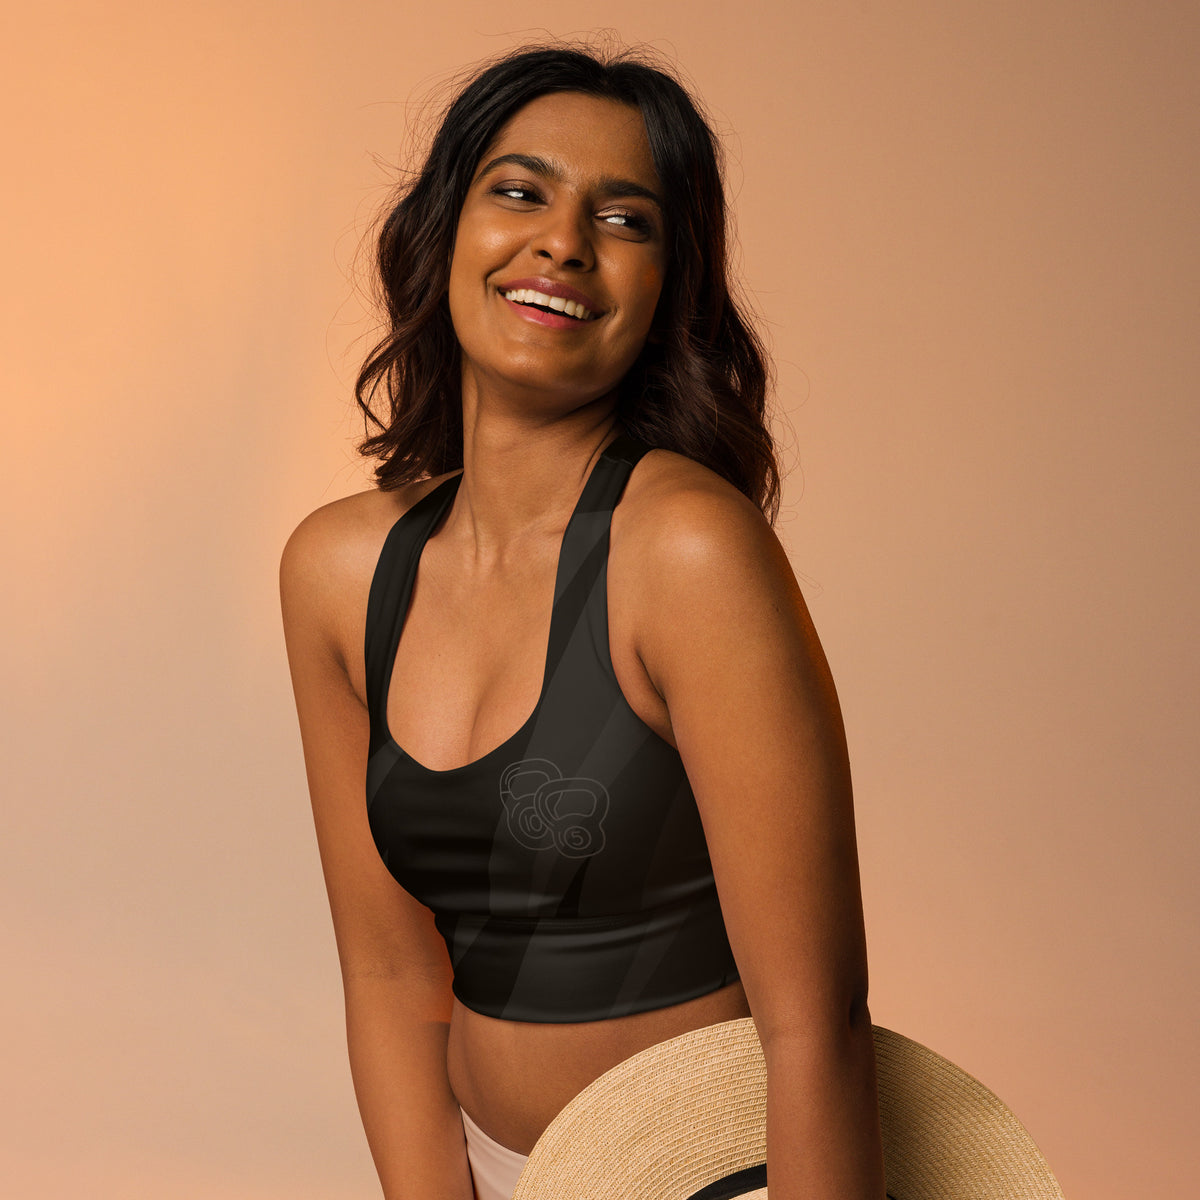 Black Longline Sports Bra - Revive Wear     Black Longline Sports Bra is perfect for workouts and everyday wear. Compression fabric and mesh lining, maximum support. Shop Sports Bras at Revive Wear. 